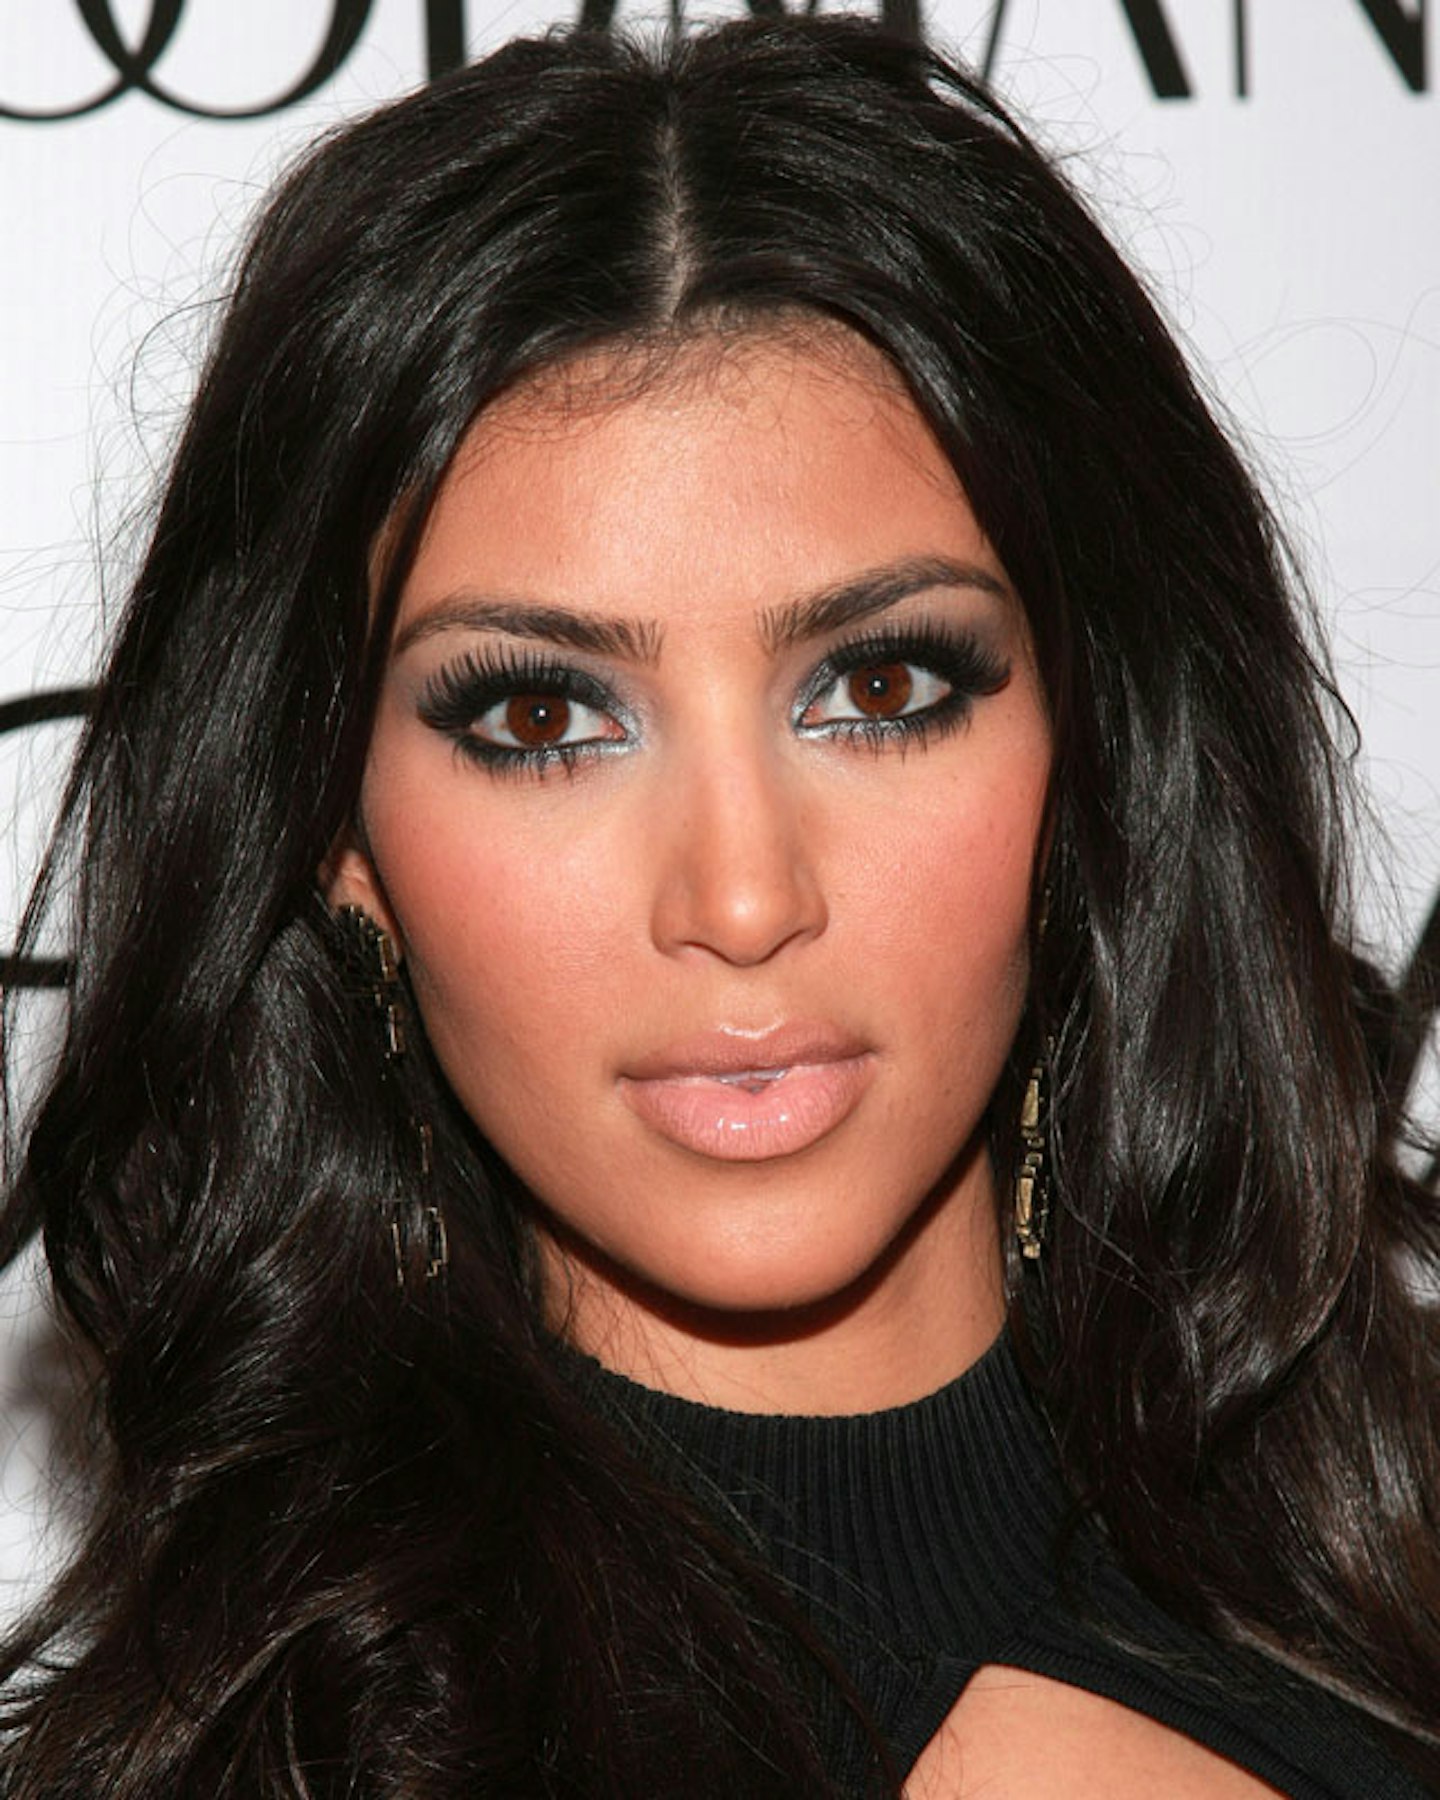 There was once a time where we all looked like Kim Kardashian